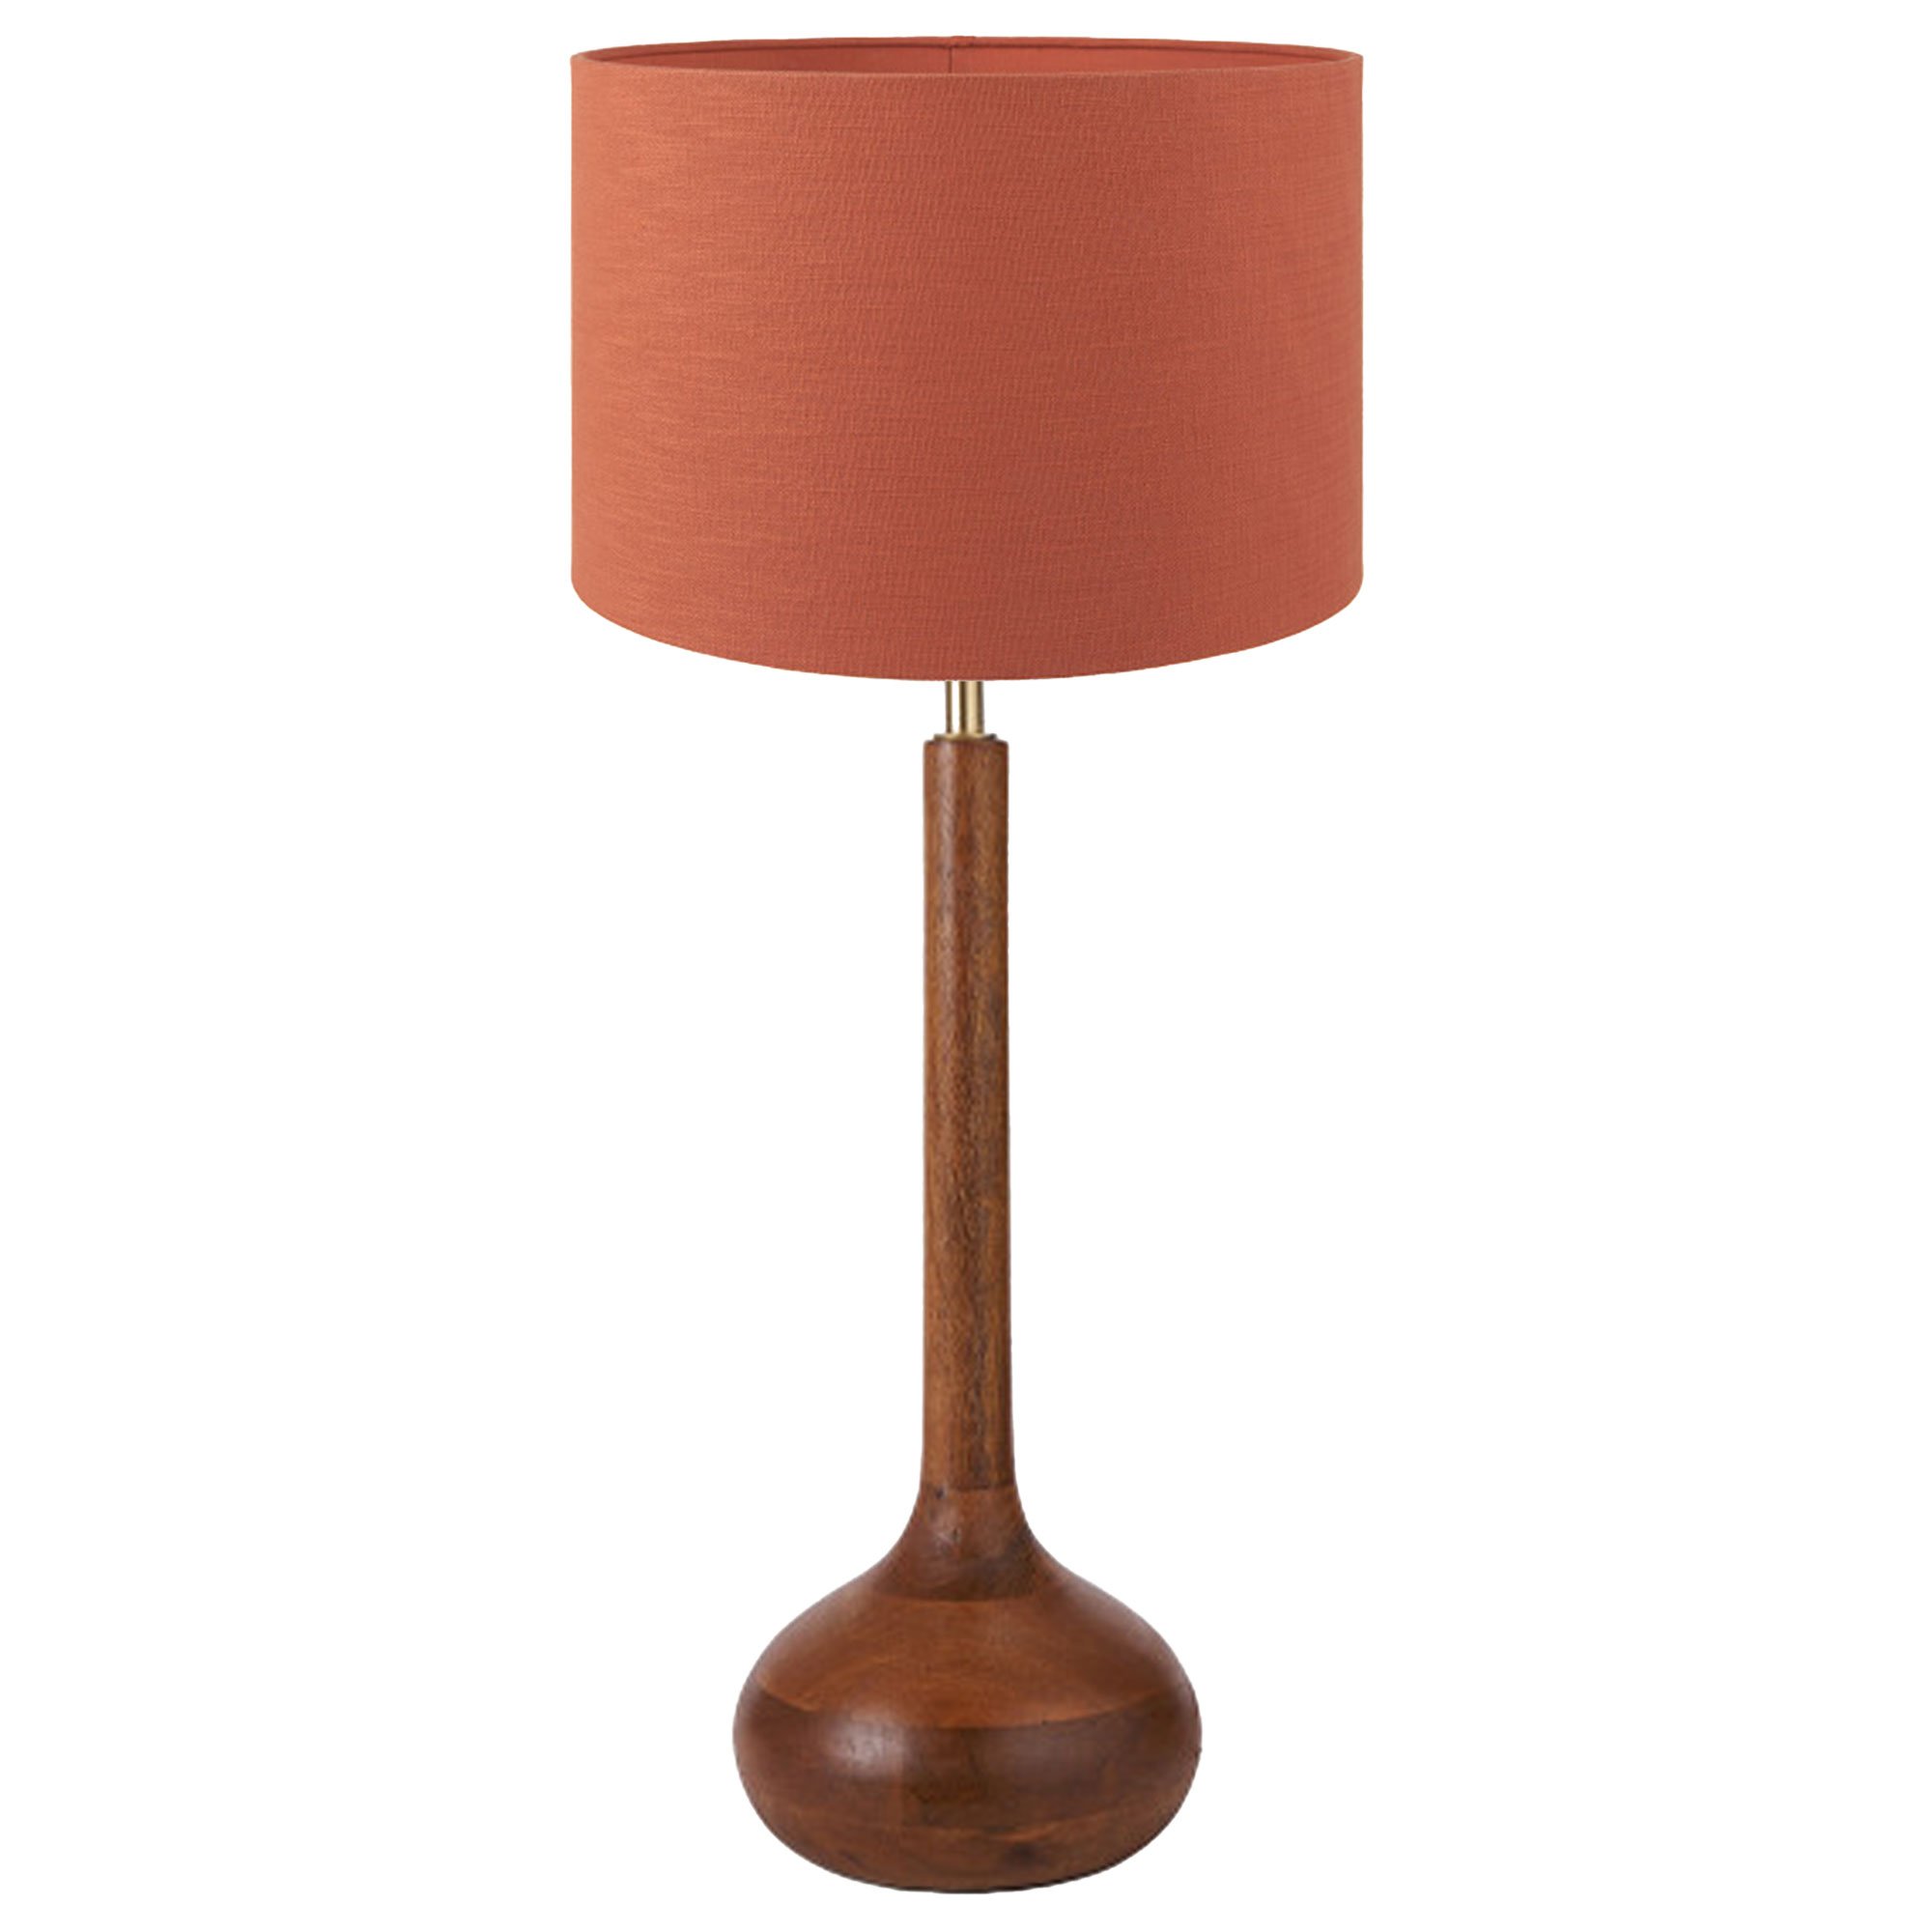 Tall Wooden Table Lamp, Brown | Barker & Stonehouse